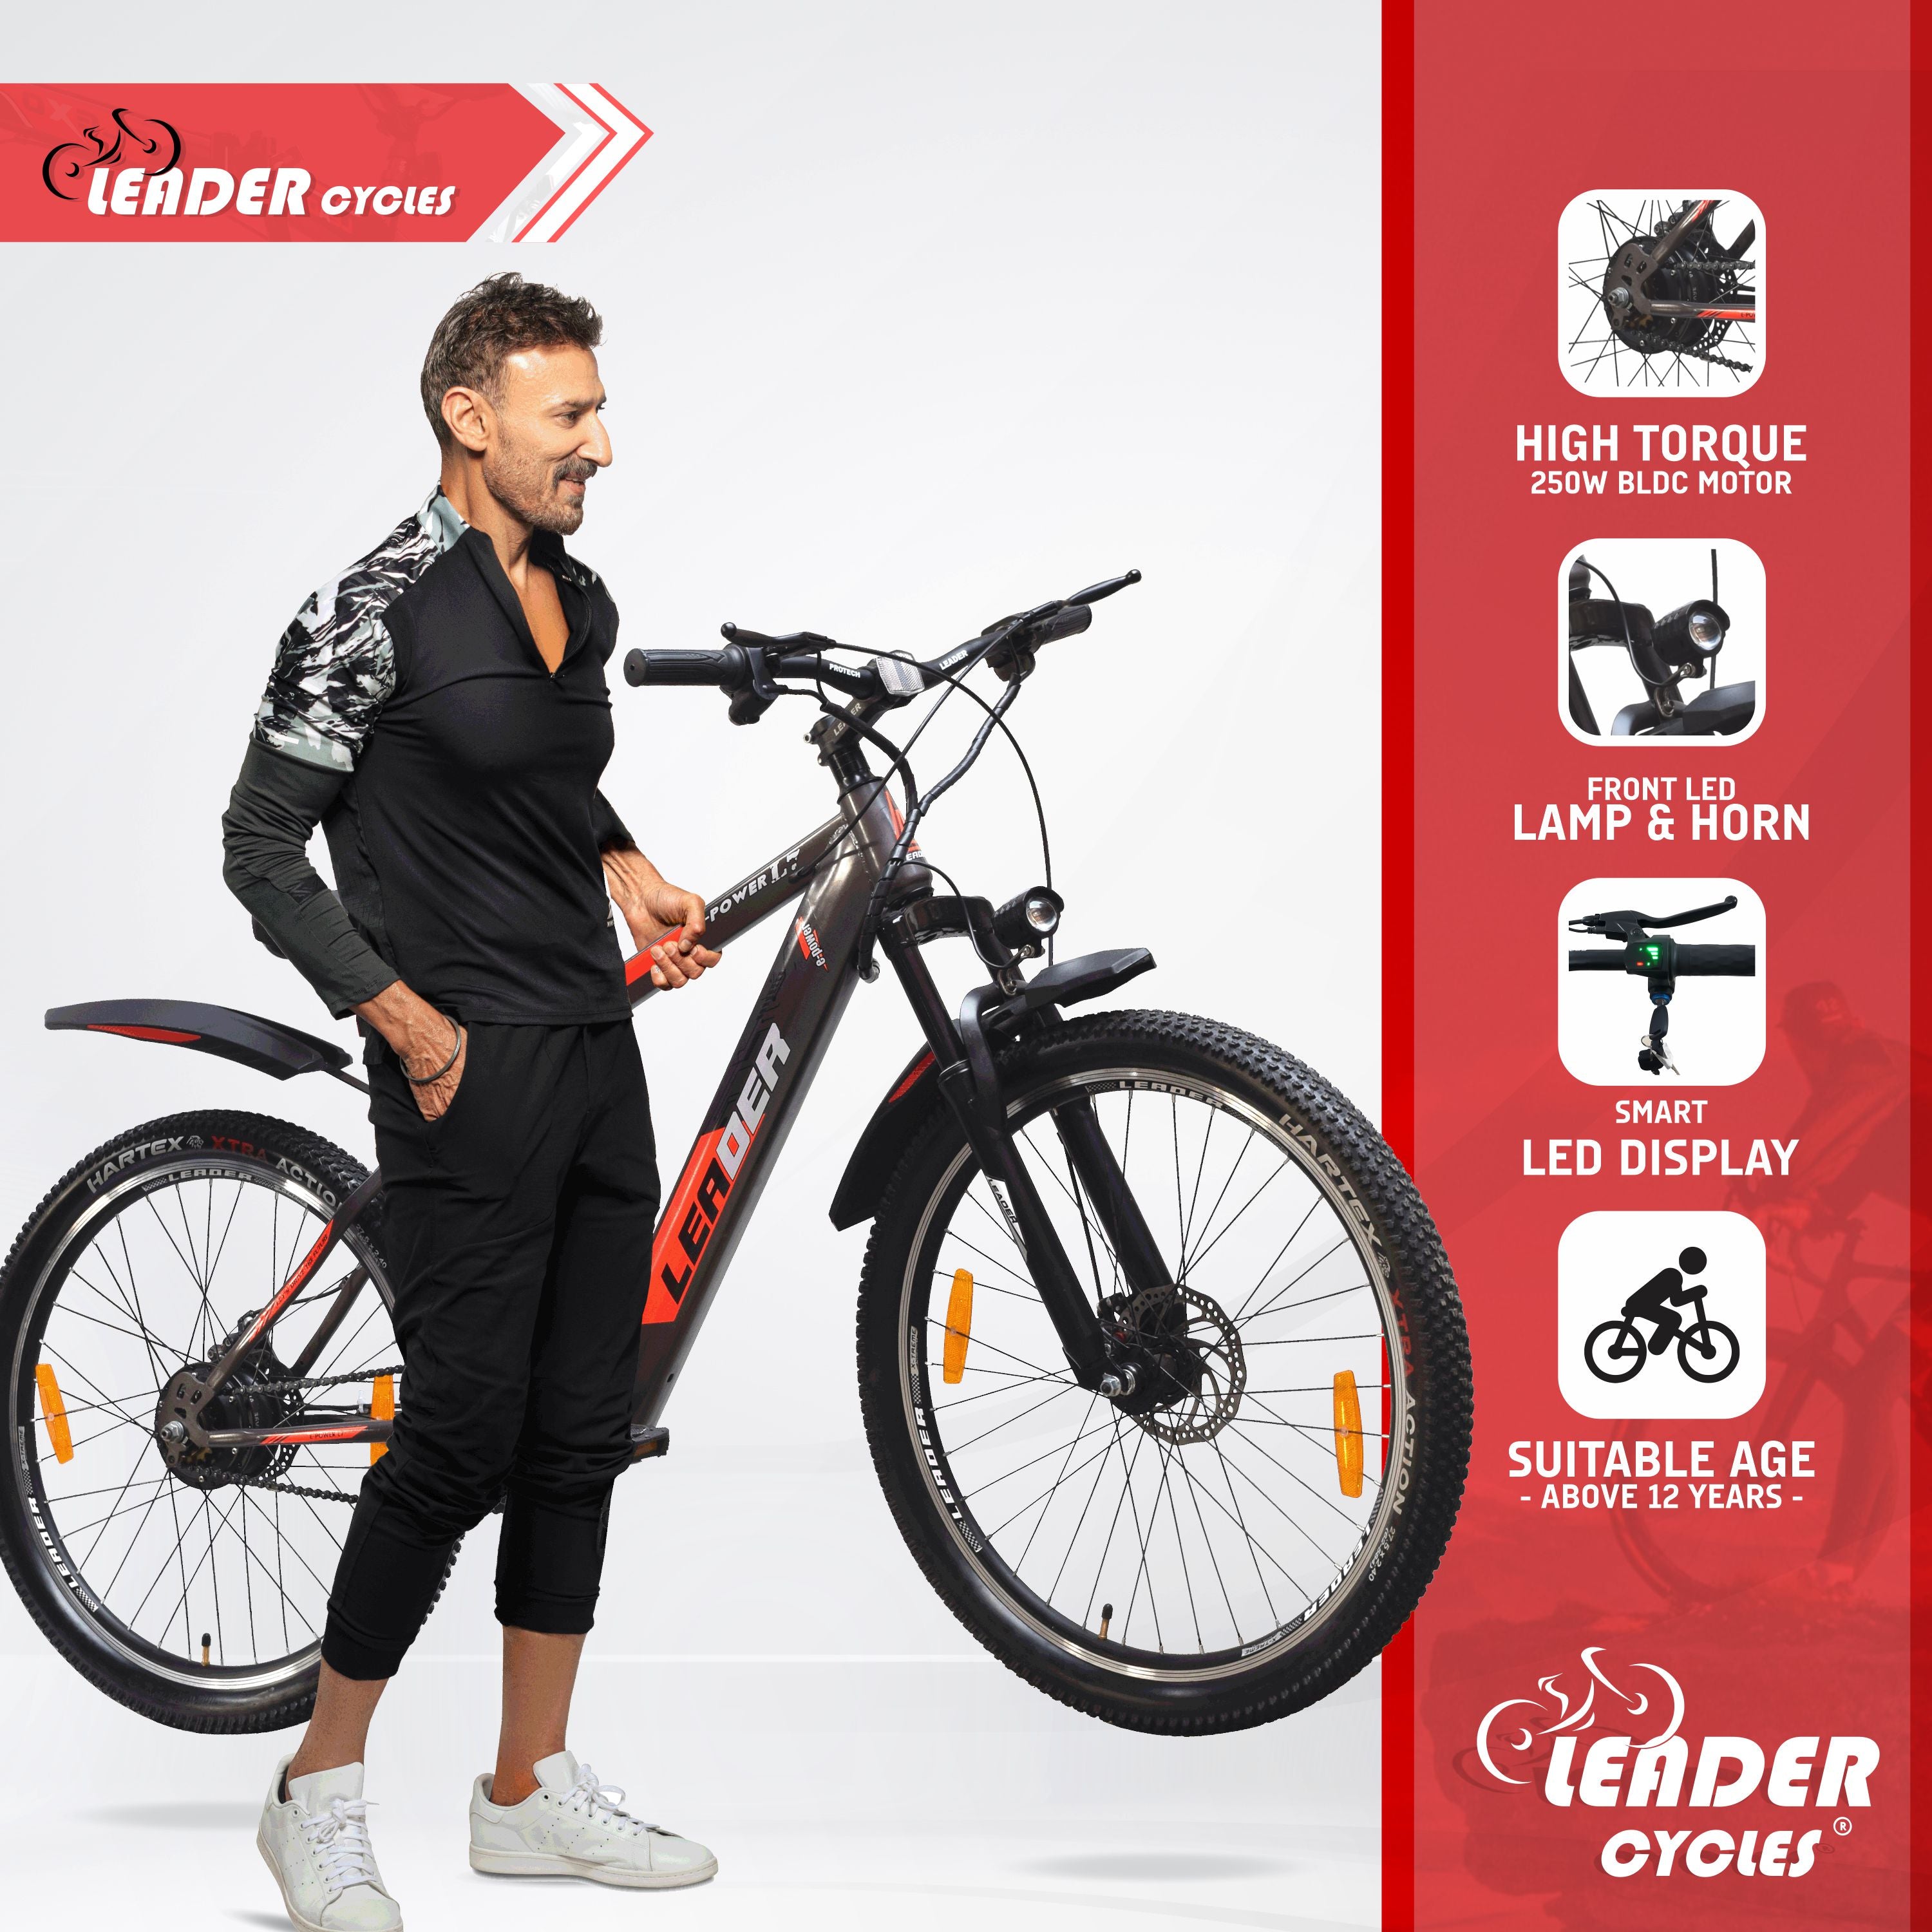 Leader E-Power L7 27.5T Electric Cycle